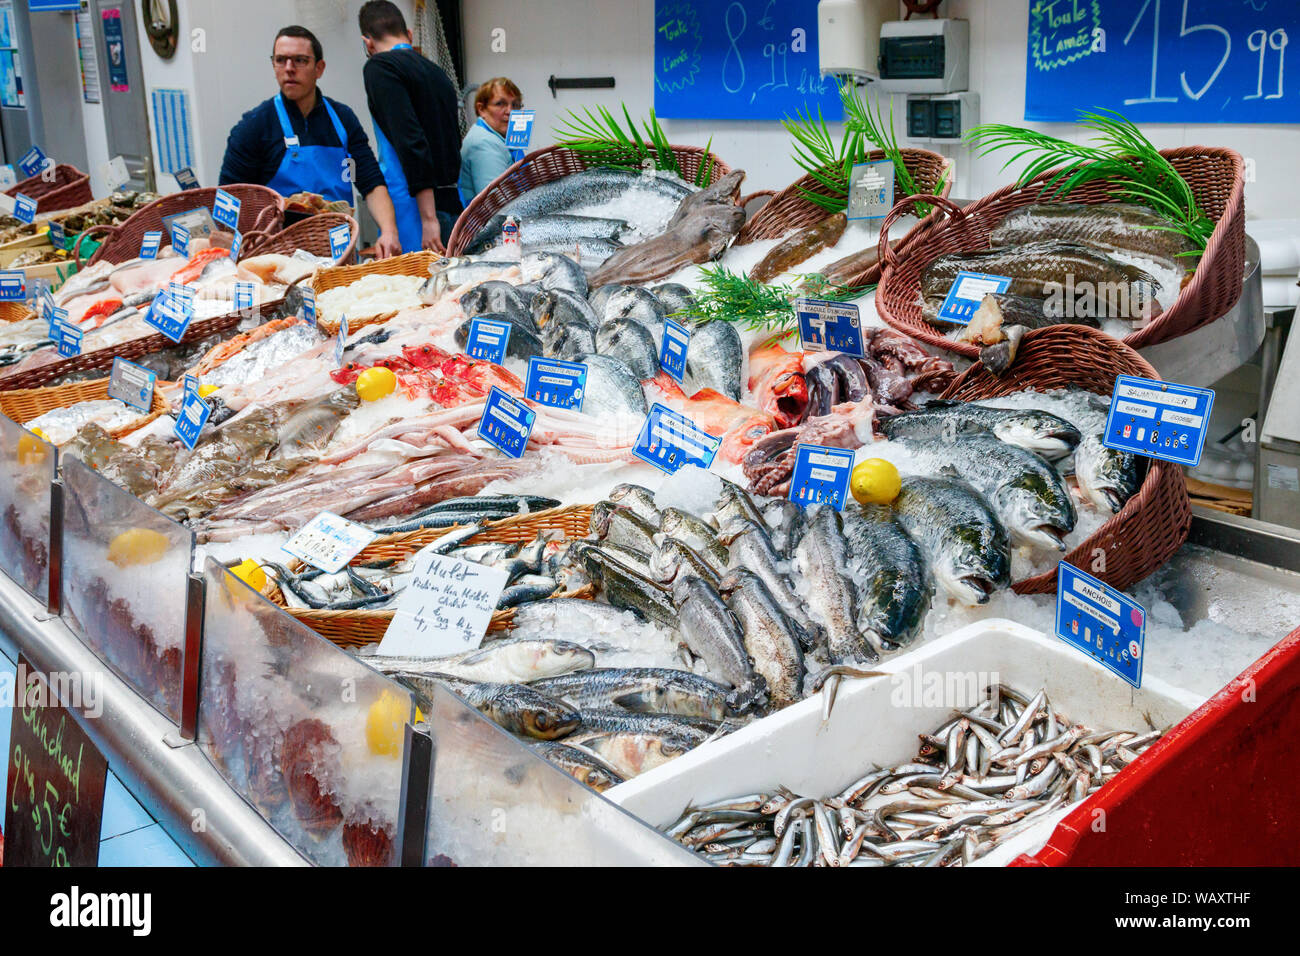 LILLE, FRANCE - APRIL 16, 2017: stand with an assortment of fish and seafood at the Wazemmes Market. It is one of Lilles largest markets. Stock Photo